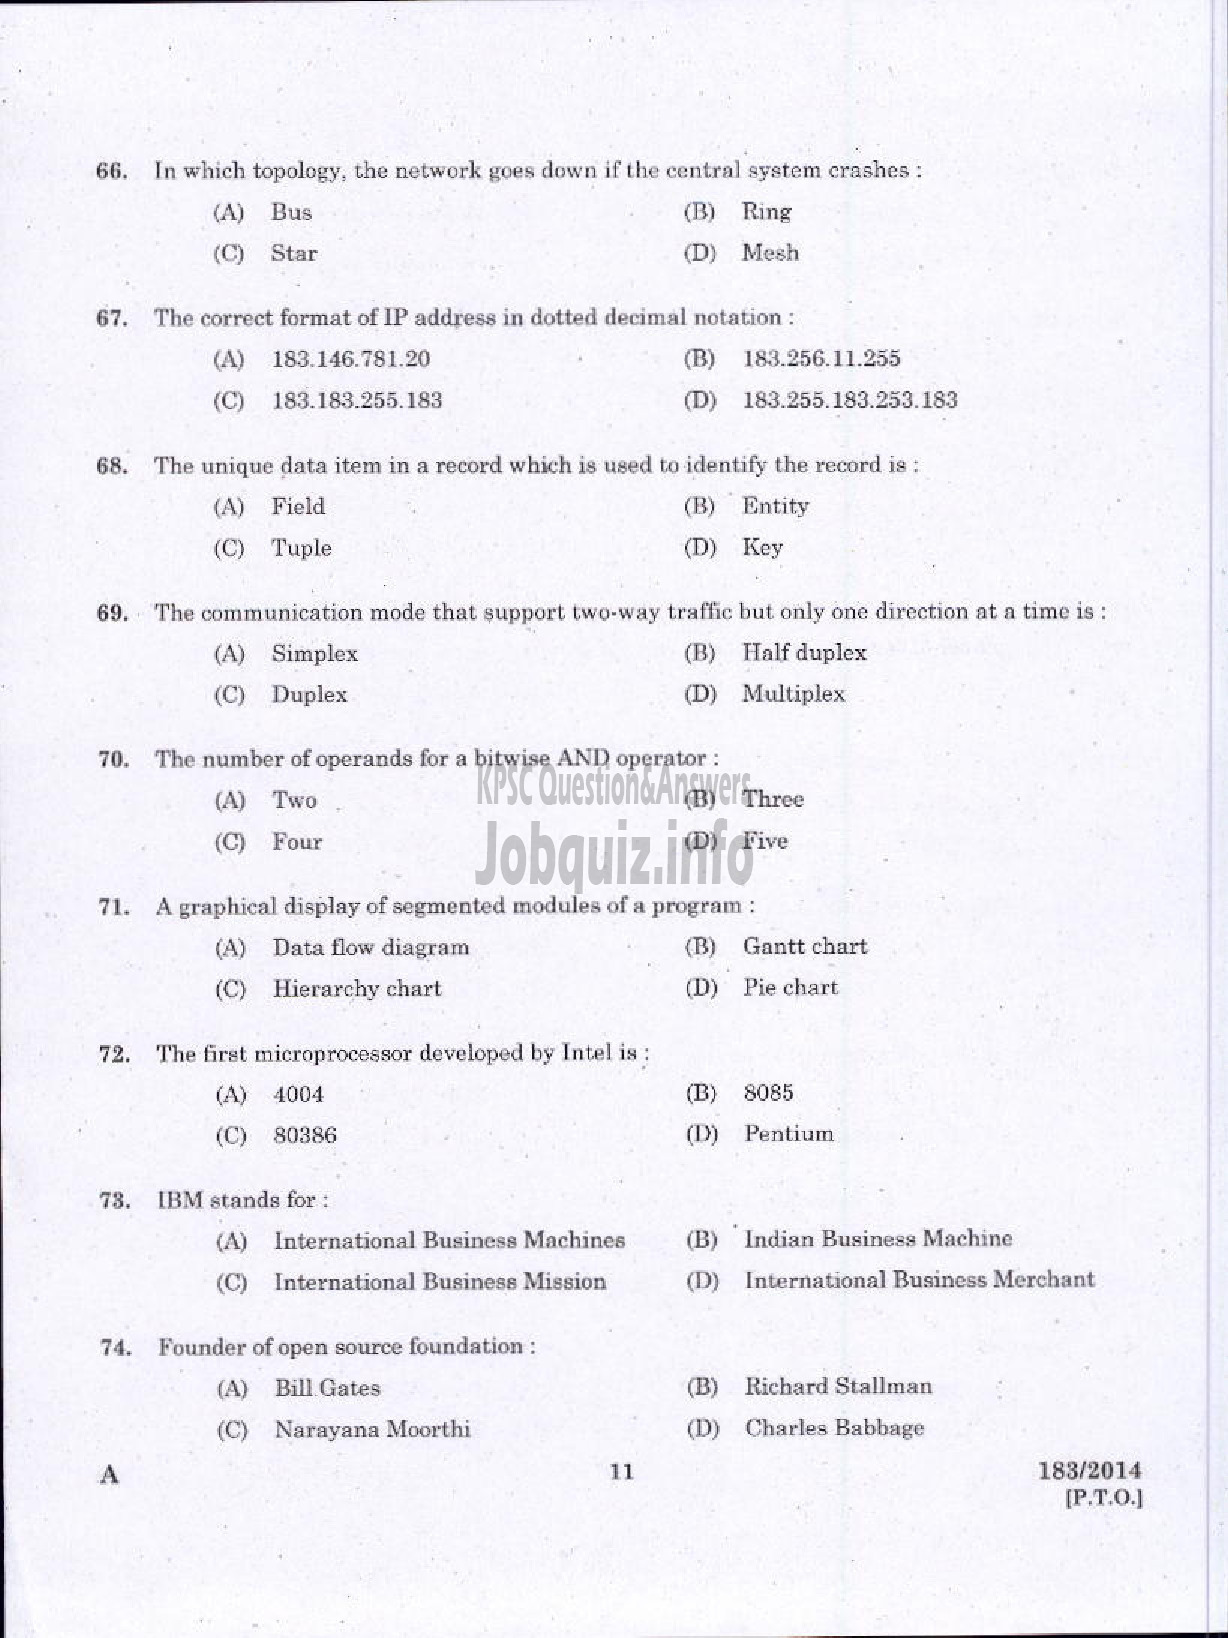 Kerala PSC Question Paper - TRADESMAN COMPUTER ENGINEERING TECHNICAL EDUCATION TVM KGD-9